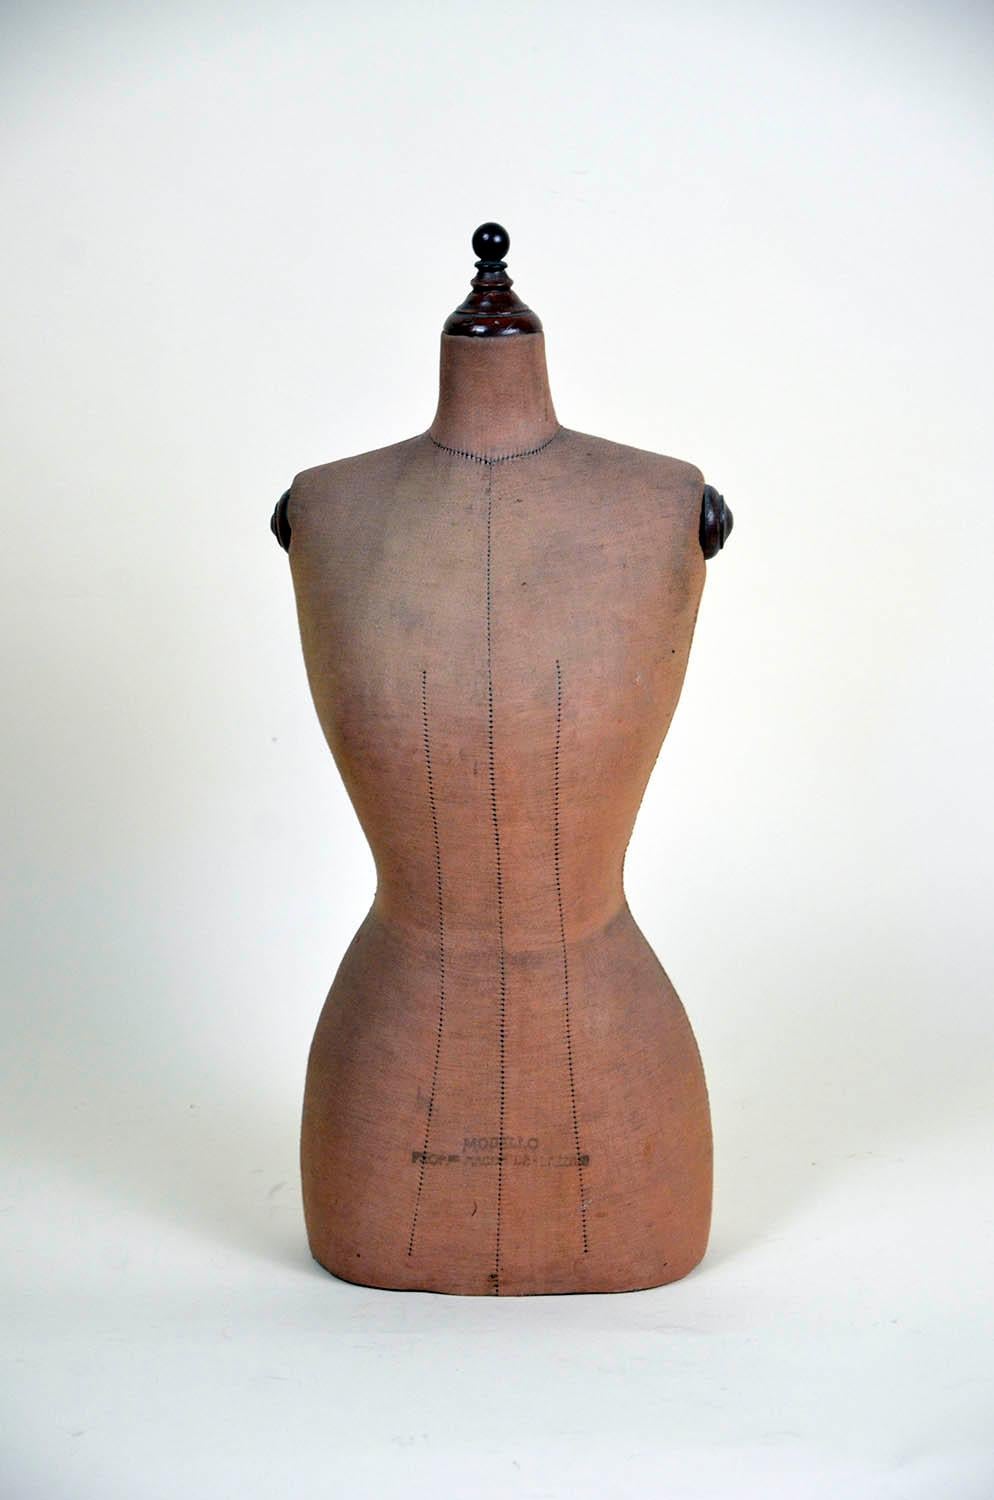 1930s vintage wooden small dress form made in Turin, Italy.

The dress form is stamped 